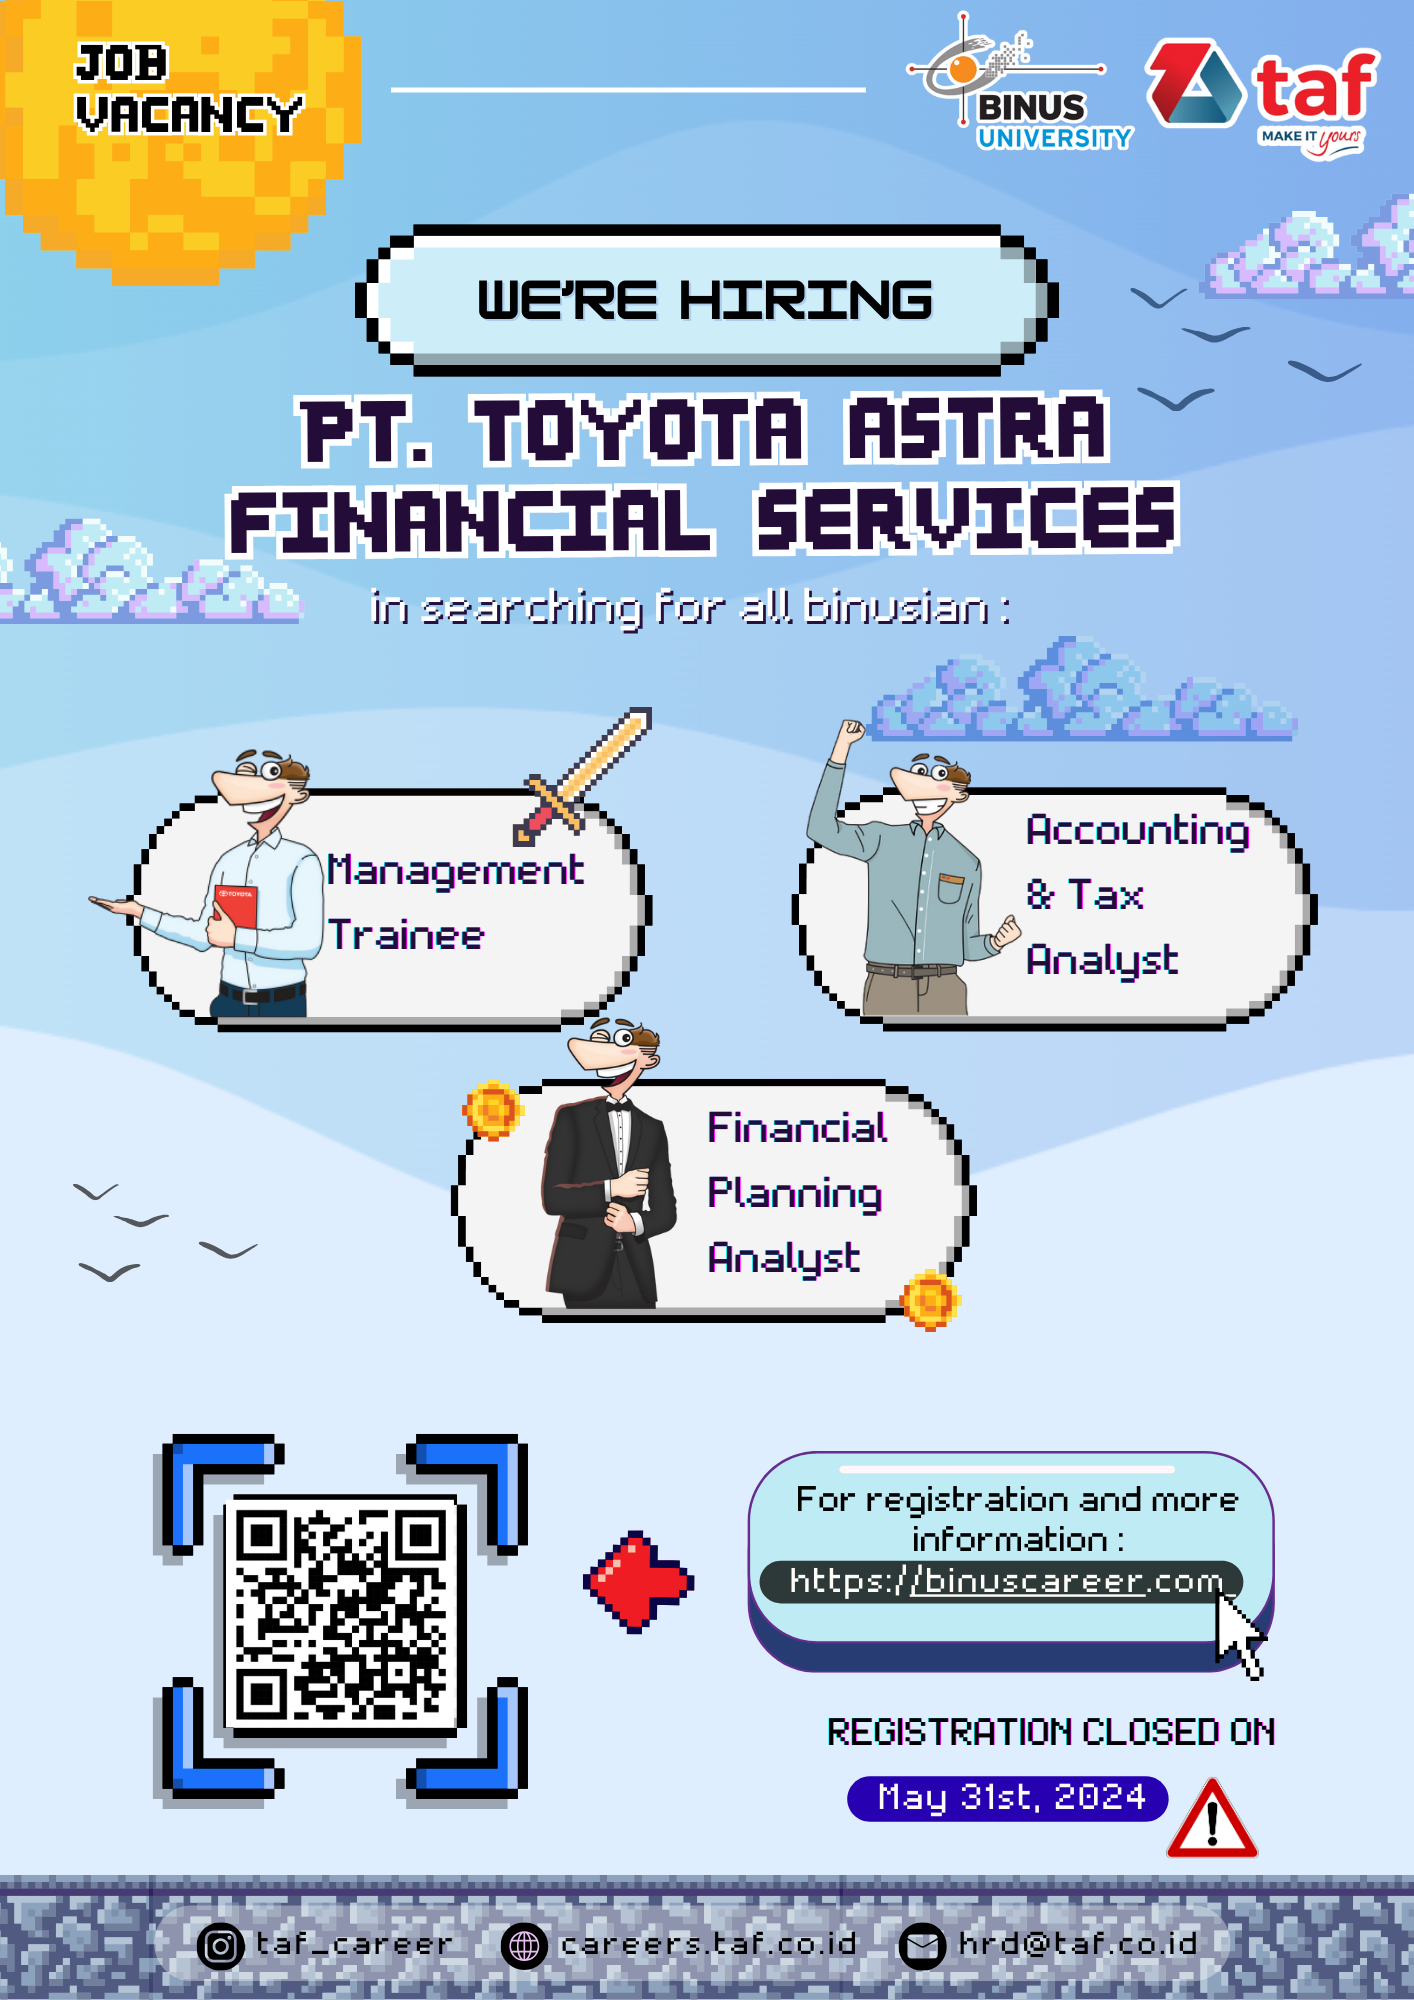 Job Opportunity - PT. Toyota Astra Financial Services